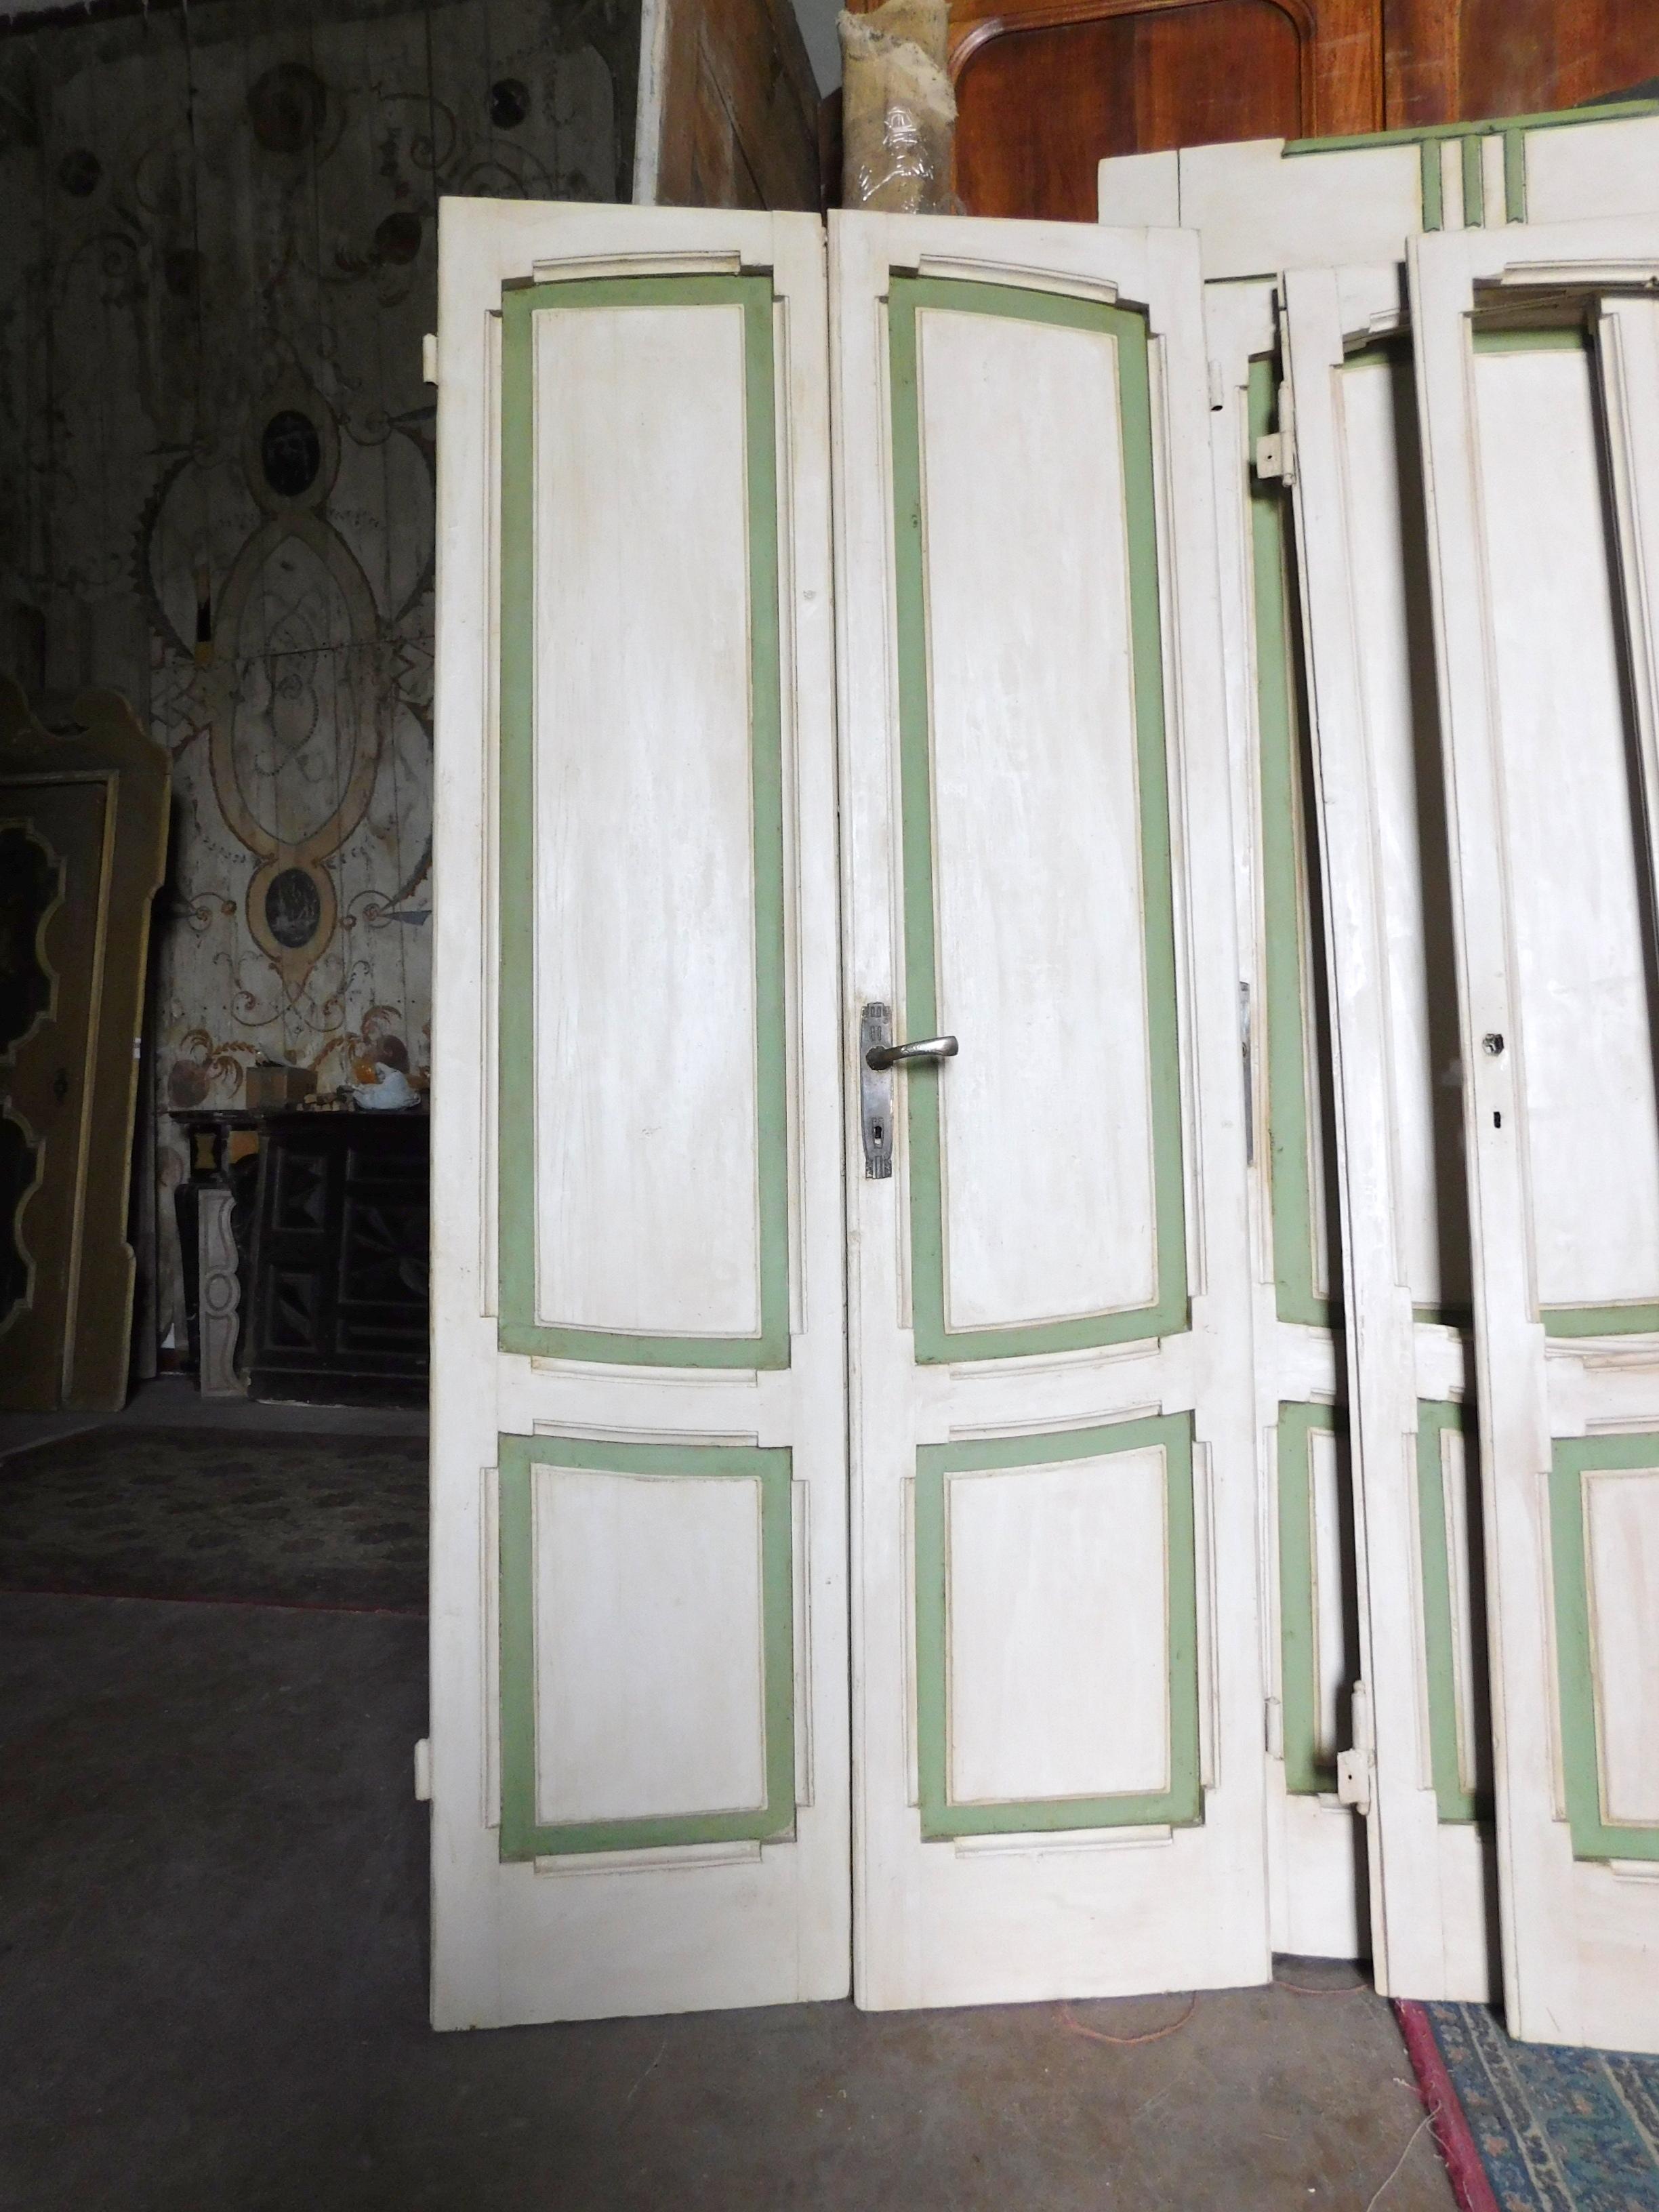 Set of 4 Deco Lacquered Doors, White / Green, Different Size, Milan 1920 For Sale 2